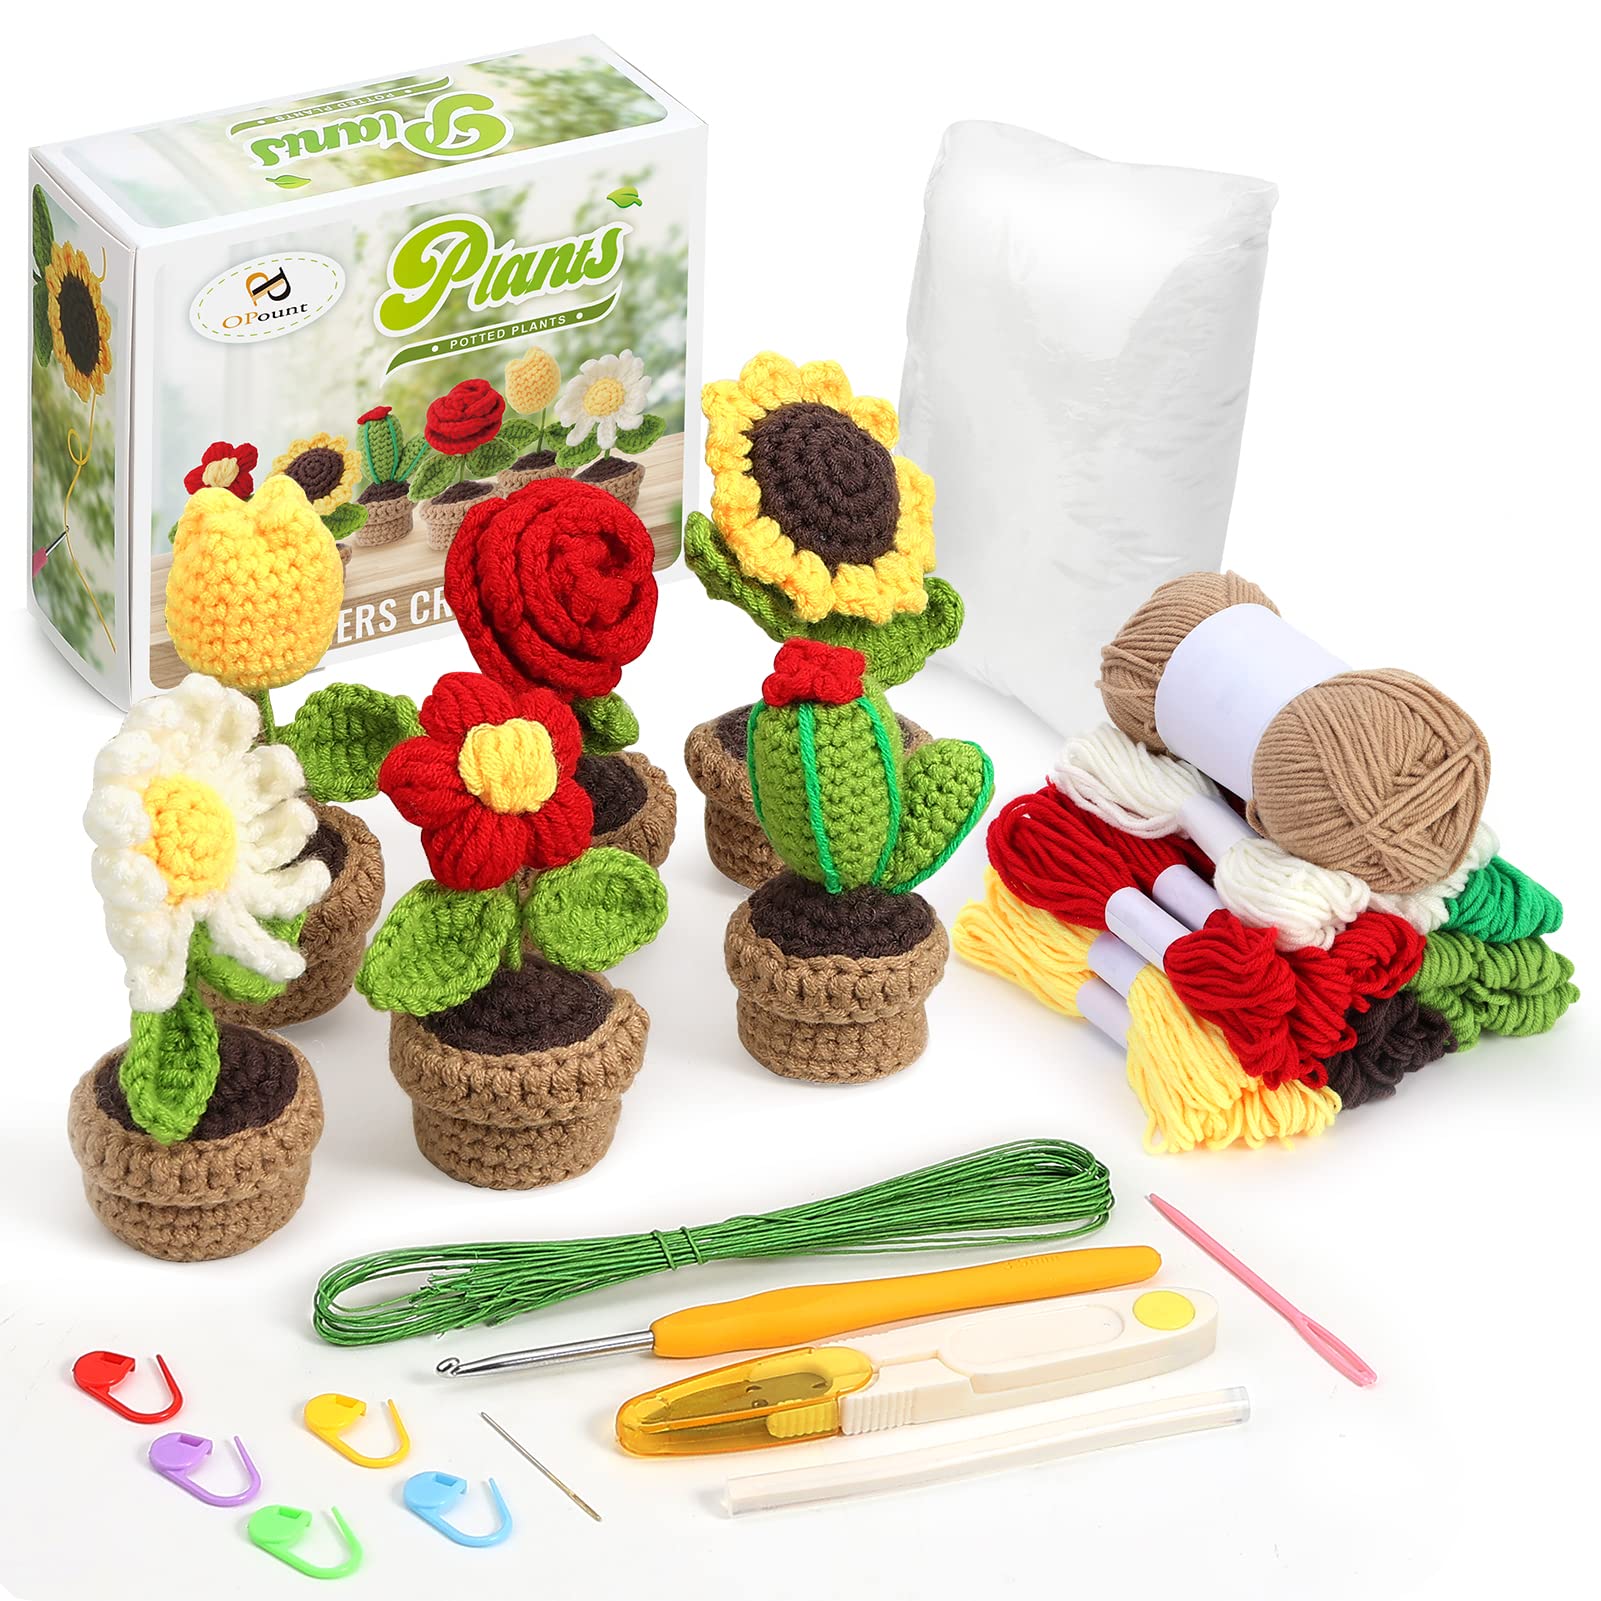 PP OPOUNT Beginner Crochet Kit - 3 PCS Potted Plants, Complete Starter Pack  for Adults and Kids with Step-by-Step Instructions and Video Tutorials